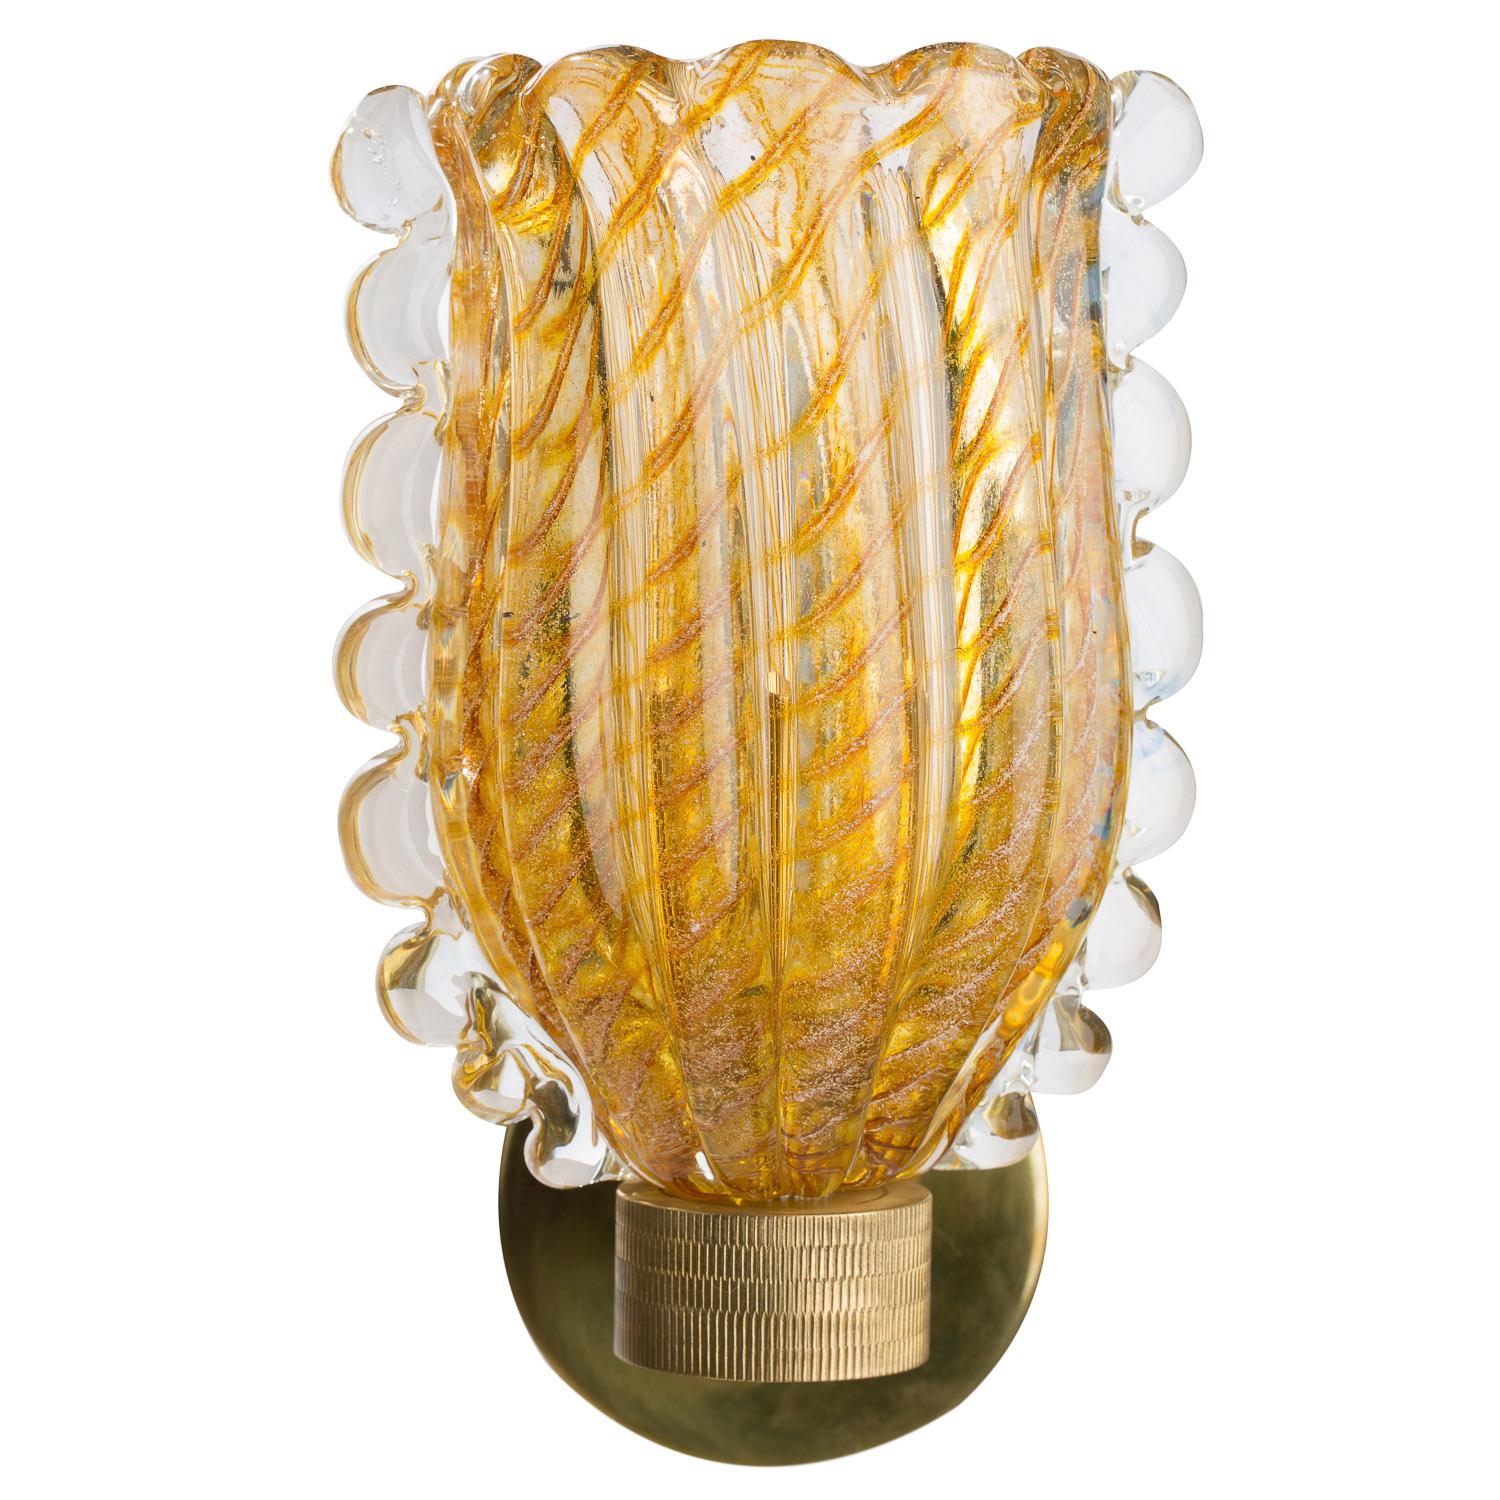 Hollywood Regency Unique Murano Art Glass Sconces in Cristallo 24ct Gold Leaf & Amber Candy Canes For Sale